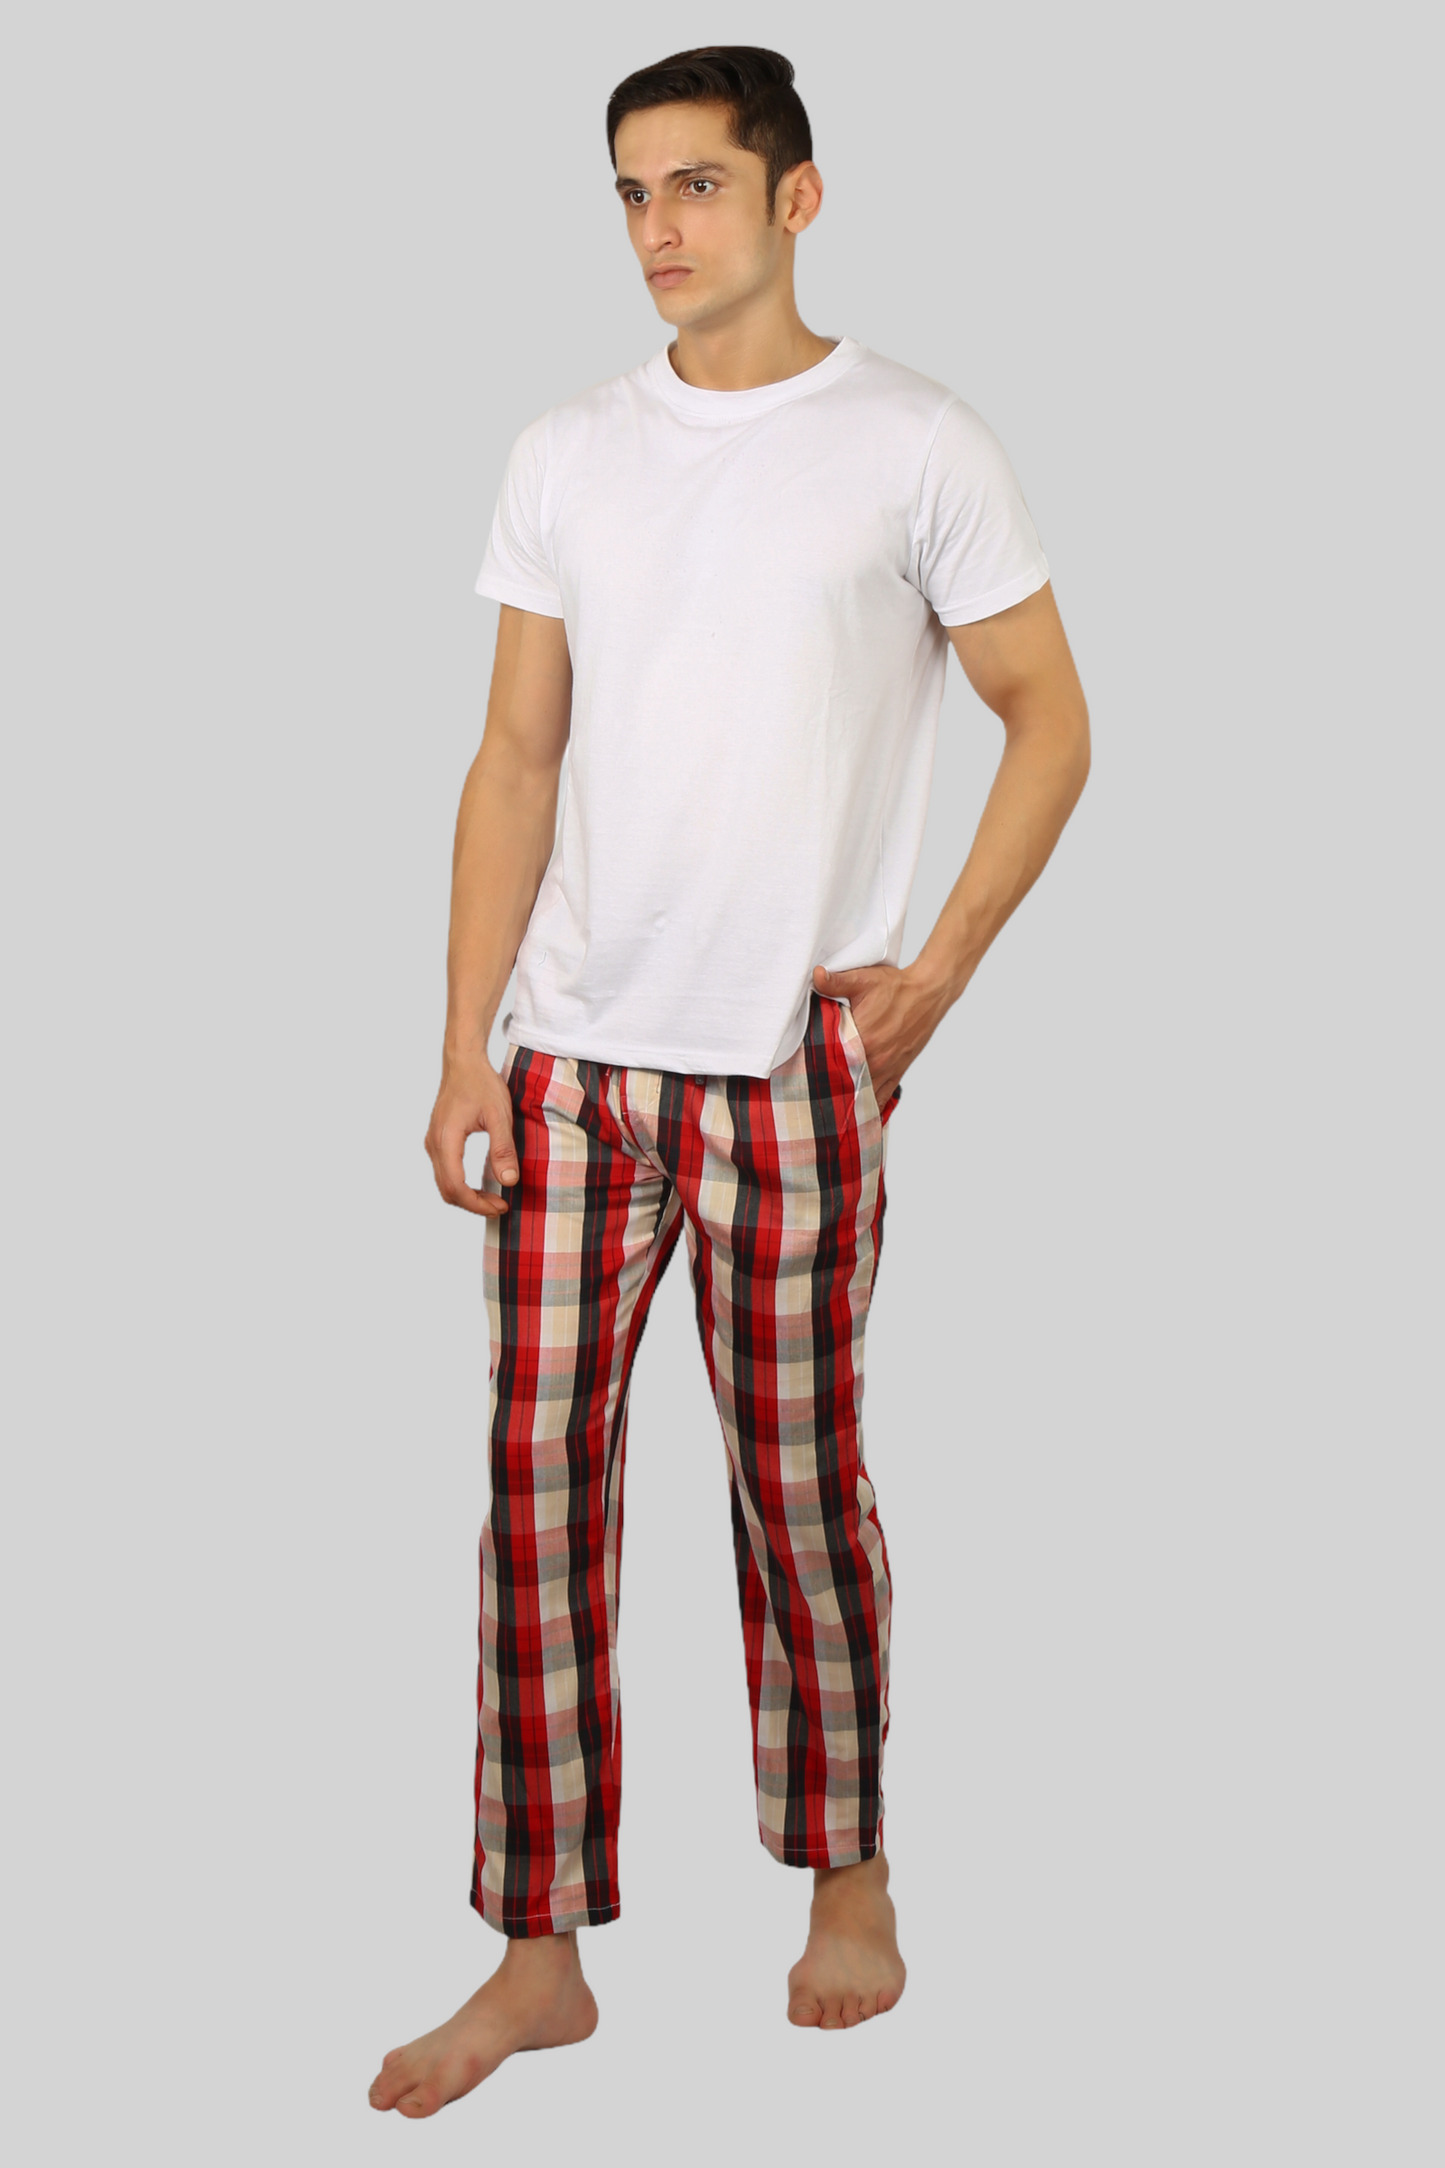 Red and Black Stripe soft and super comfortable checkered pajamas for men